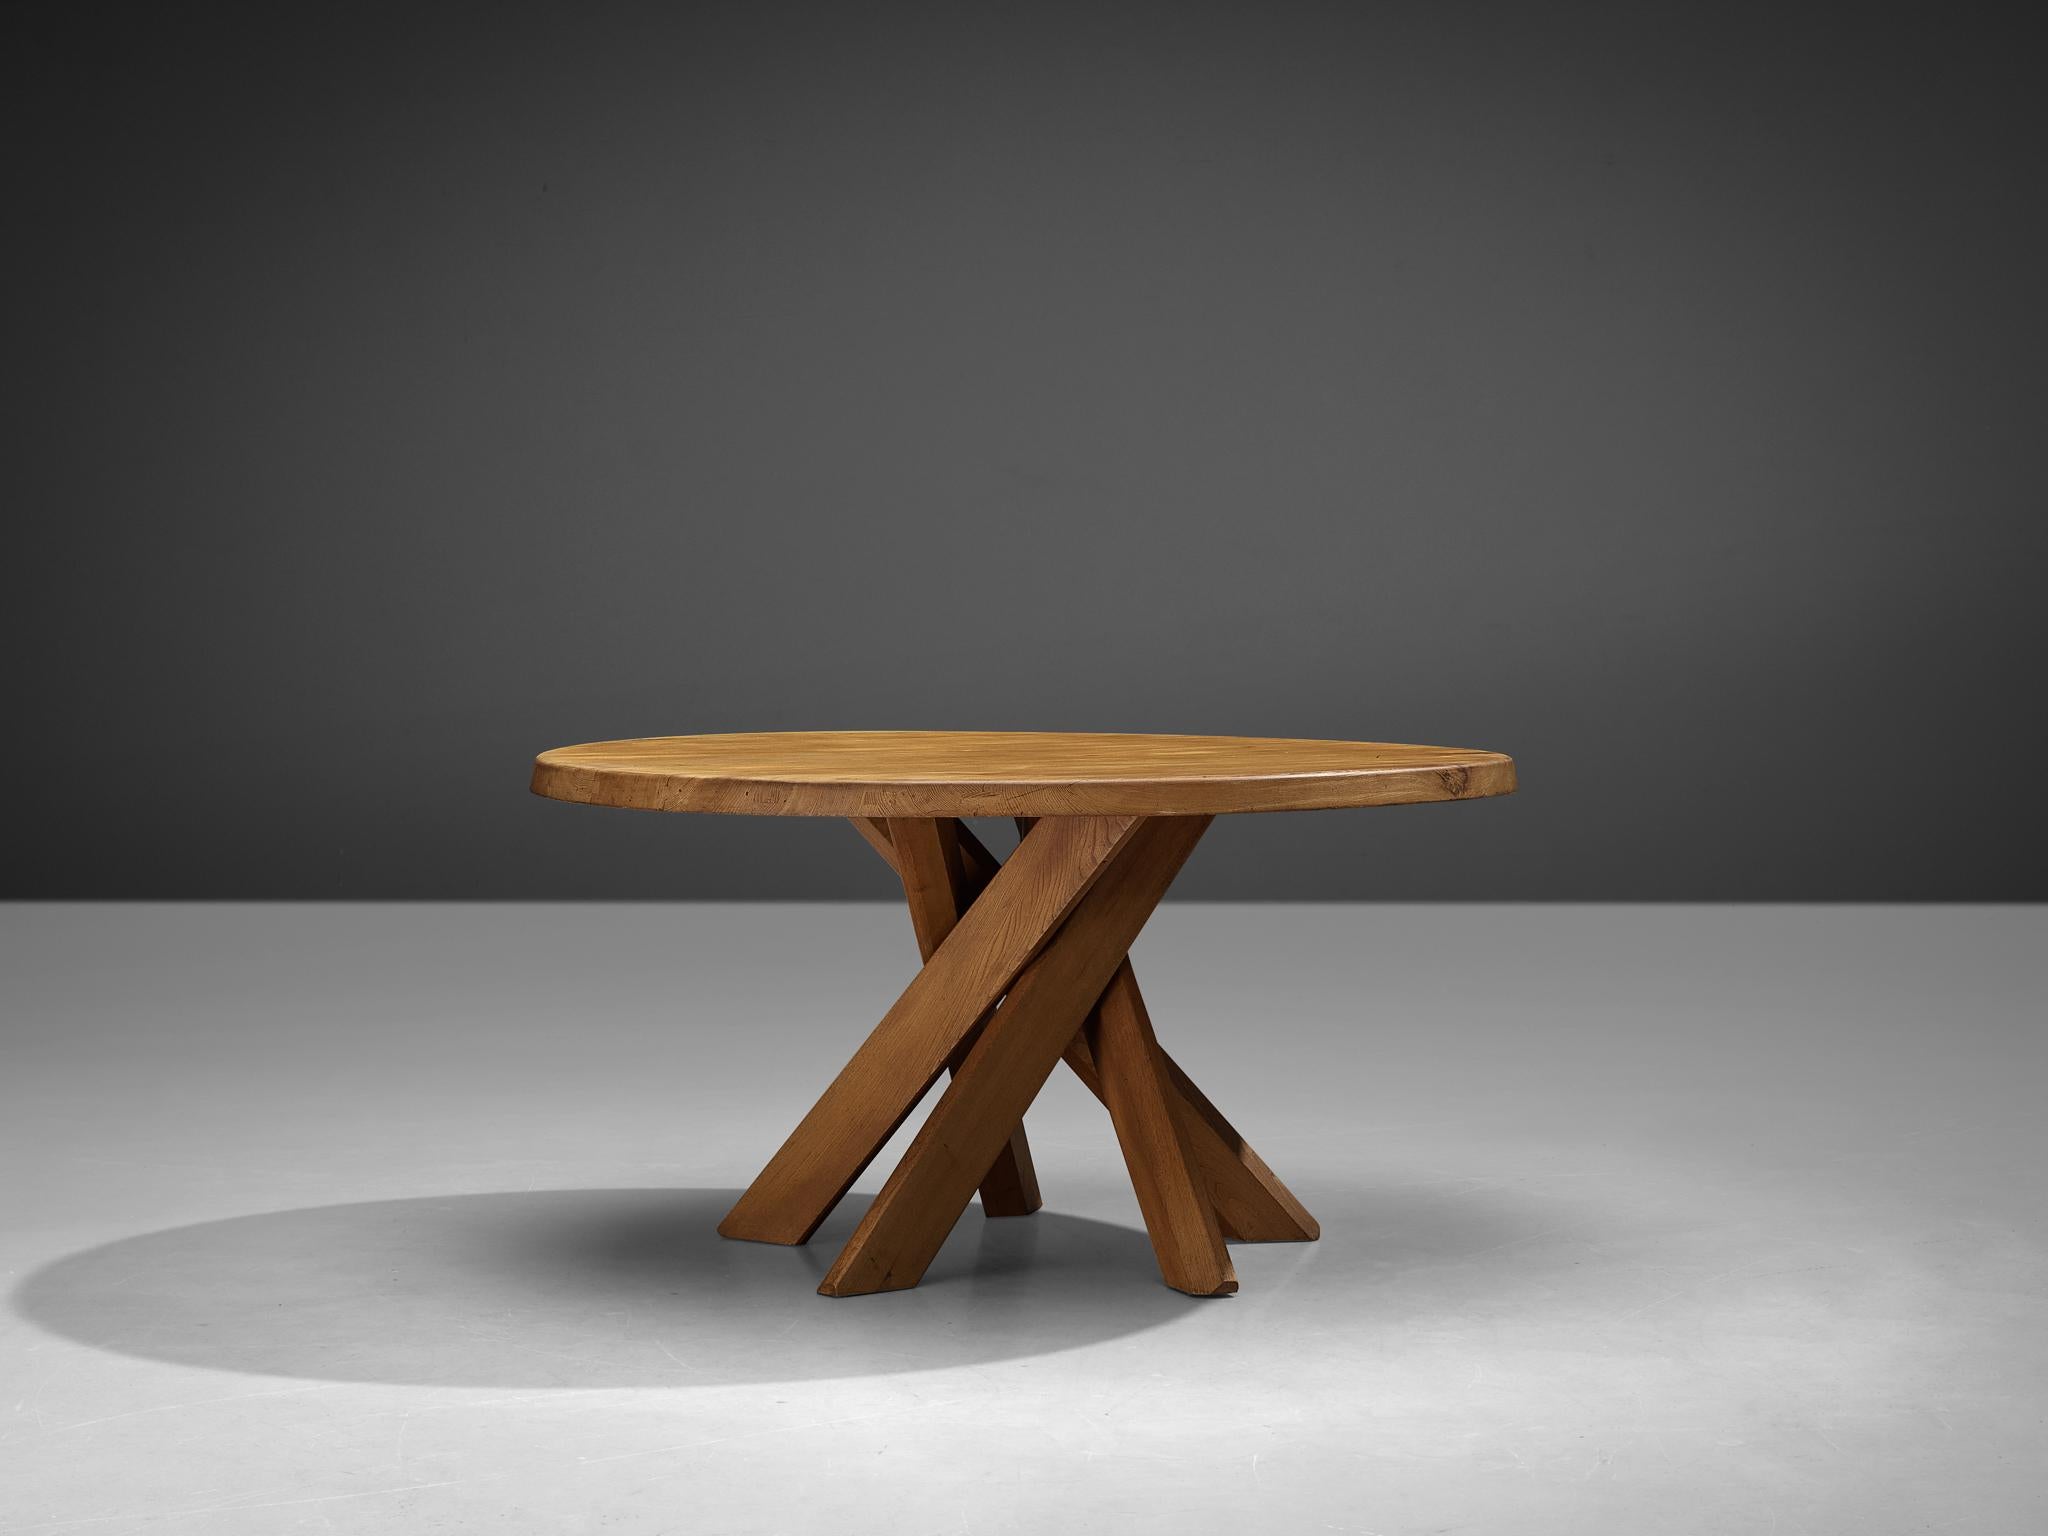 Pierre Chapo, dining table model 'T21E', elm, France, 1973

This design is an early edition, created according to the original craft methodology of Pierre Chapo. This round 'T21 E' dining table is designed by Pierre Chapo and its table top has a